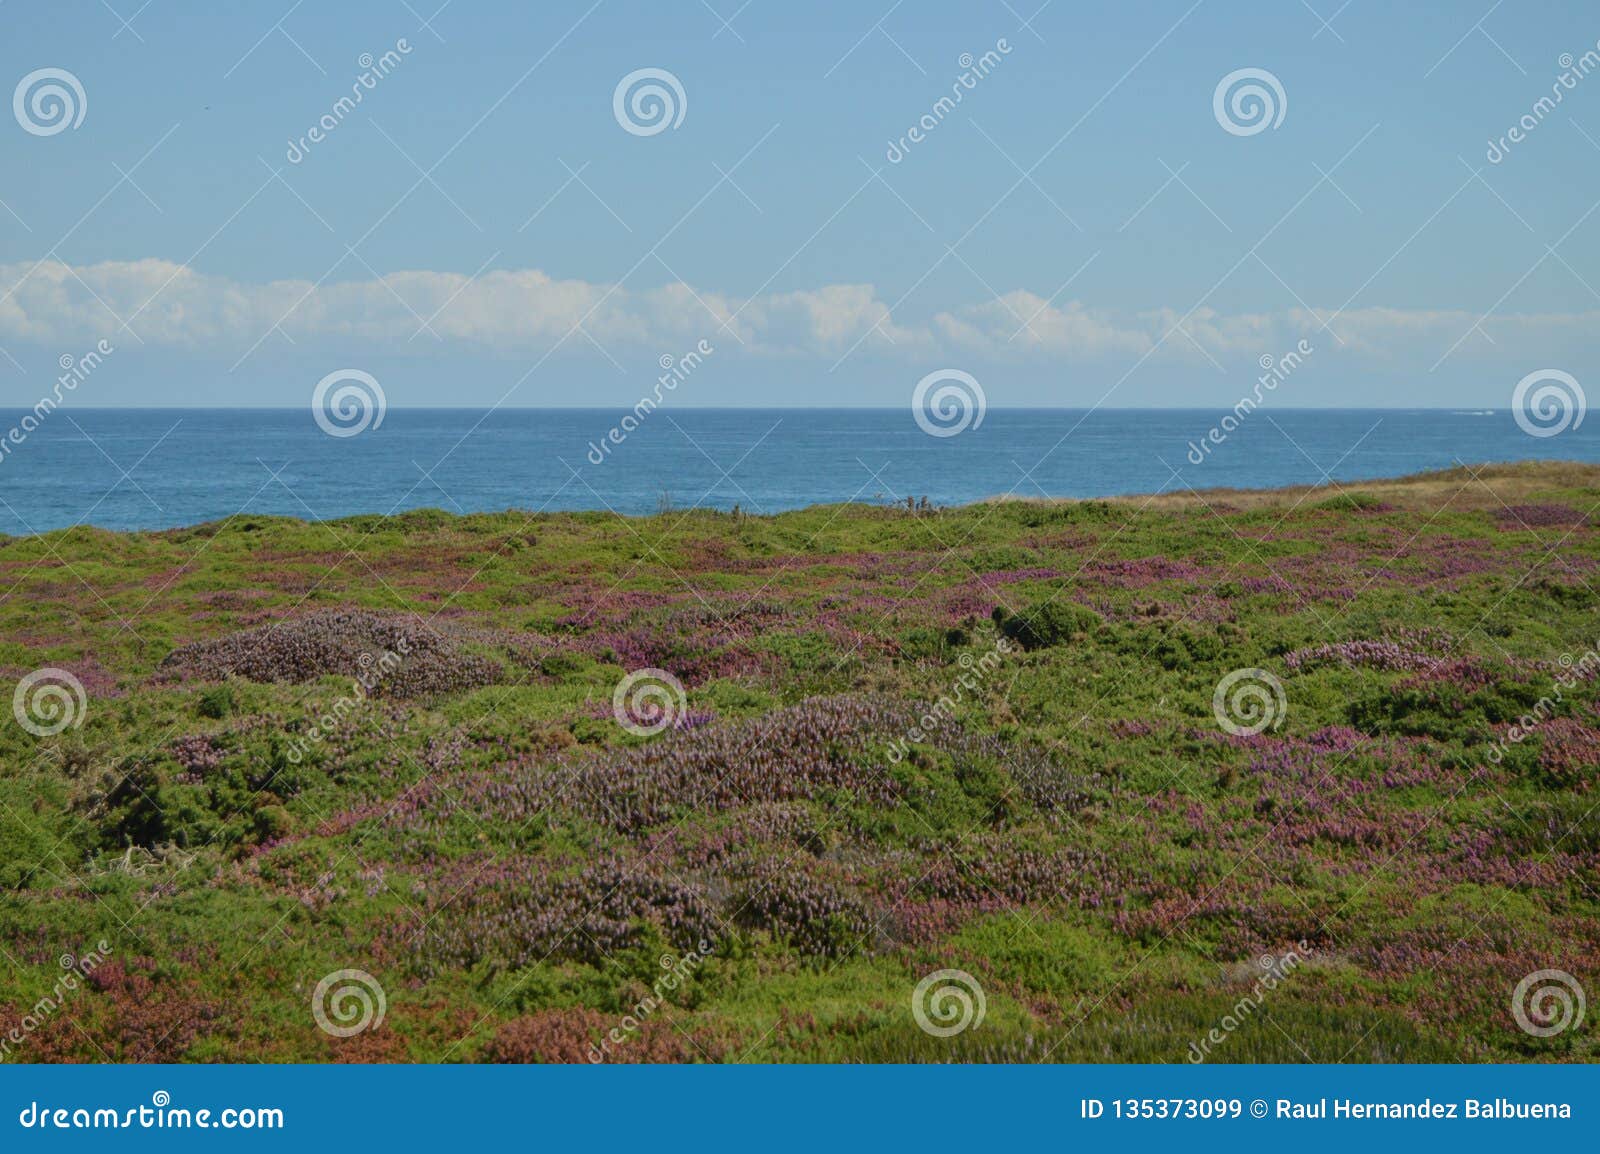 beautiful green and purple field with the horizon and cantabrian sea in the background on the beach of the cathedrals in ribadeo.